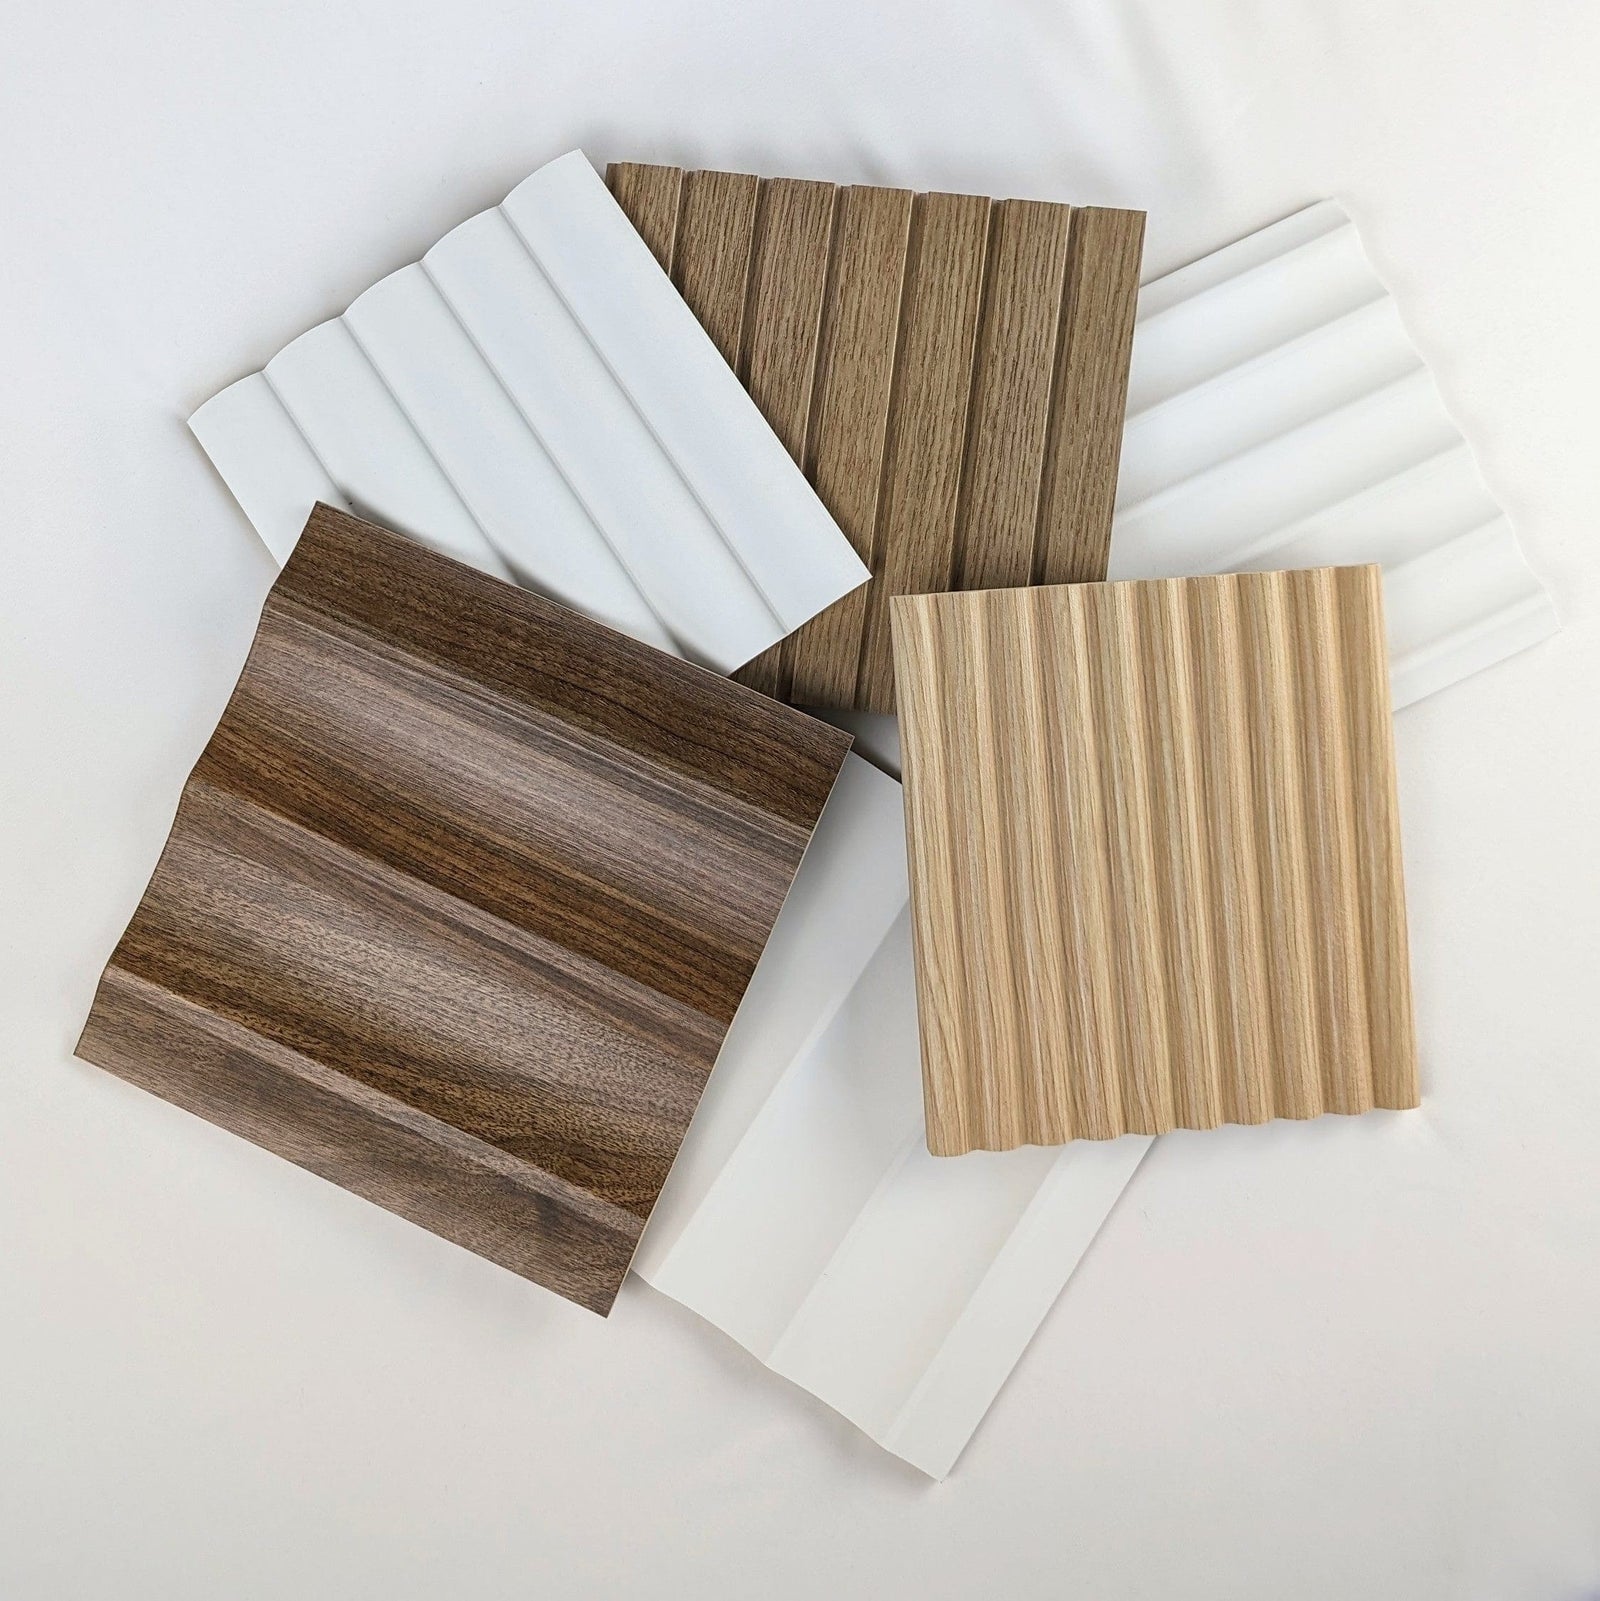 Walston Architectural Products Wall Panel 8″ X 8″ SAMPLES: FLUTED, REEDED, OR SLAT WALL PANELS / WALL CLADDING